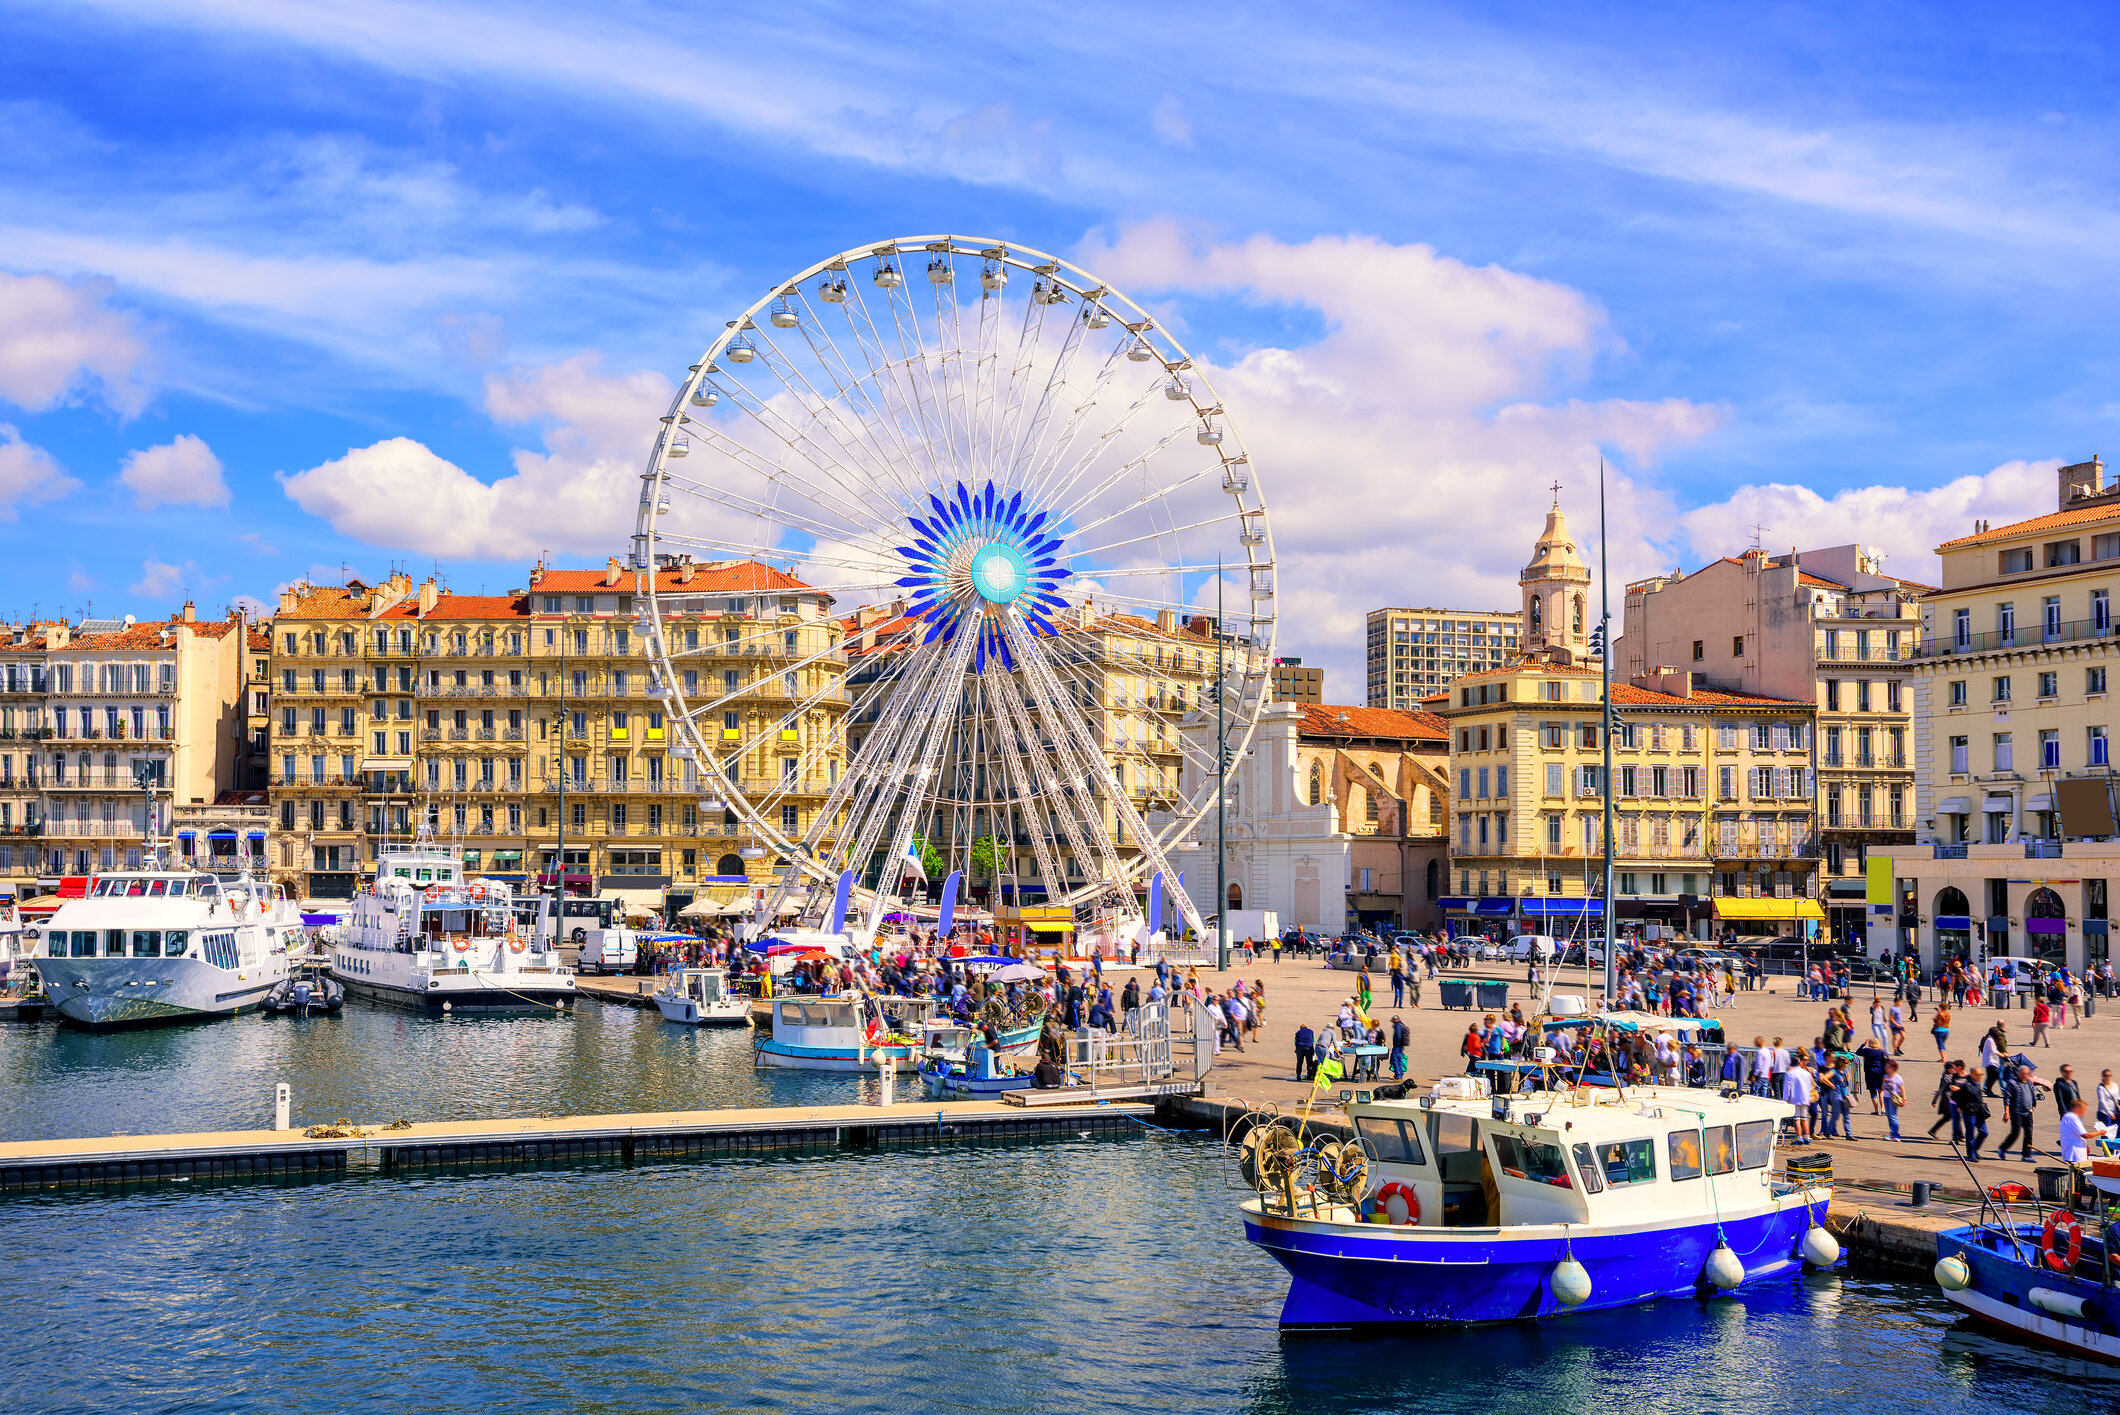 Marseille's Vieux Port and Grande Roue seen from the Saint Victor quarter (Photo courtesy Getty Images).